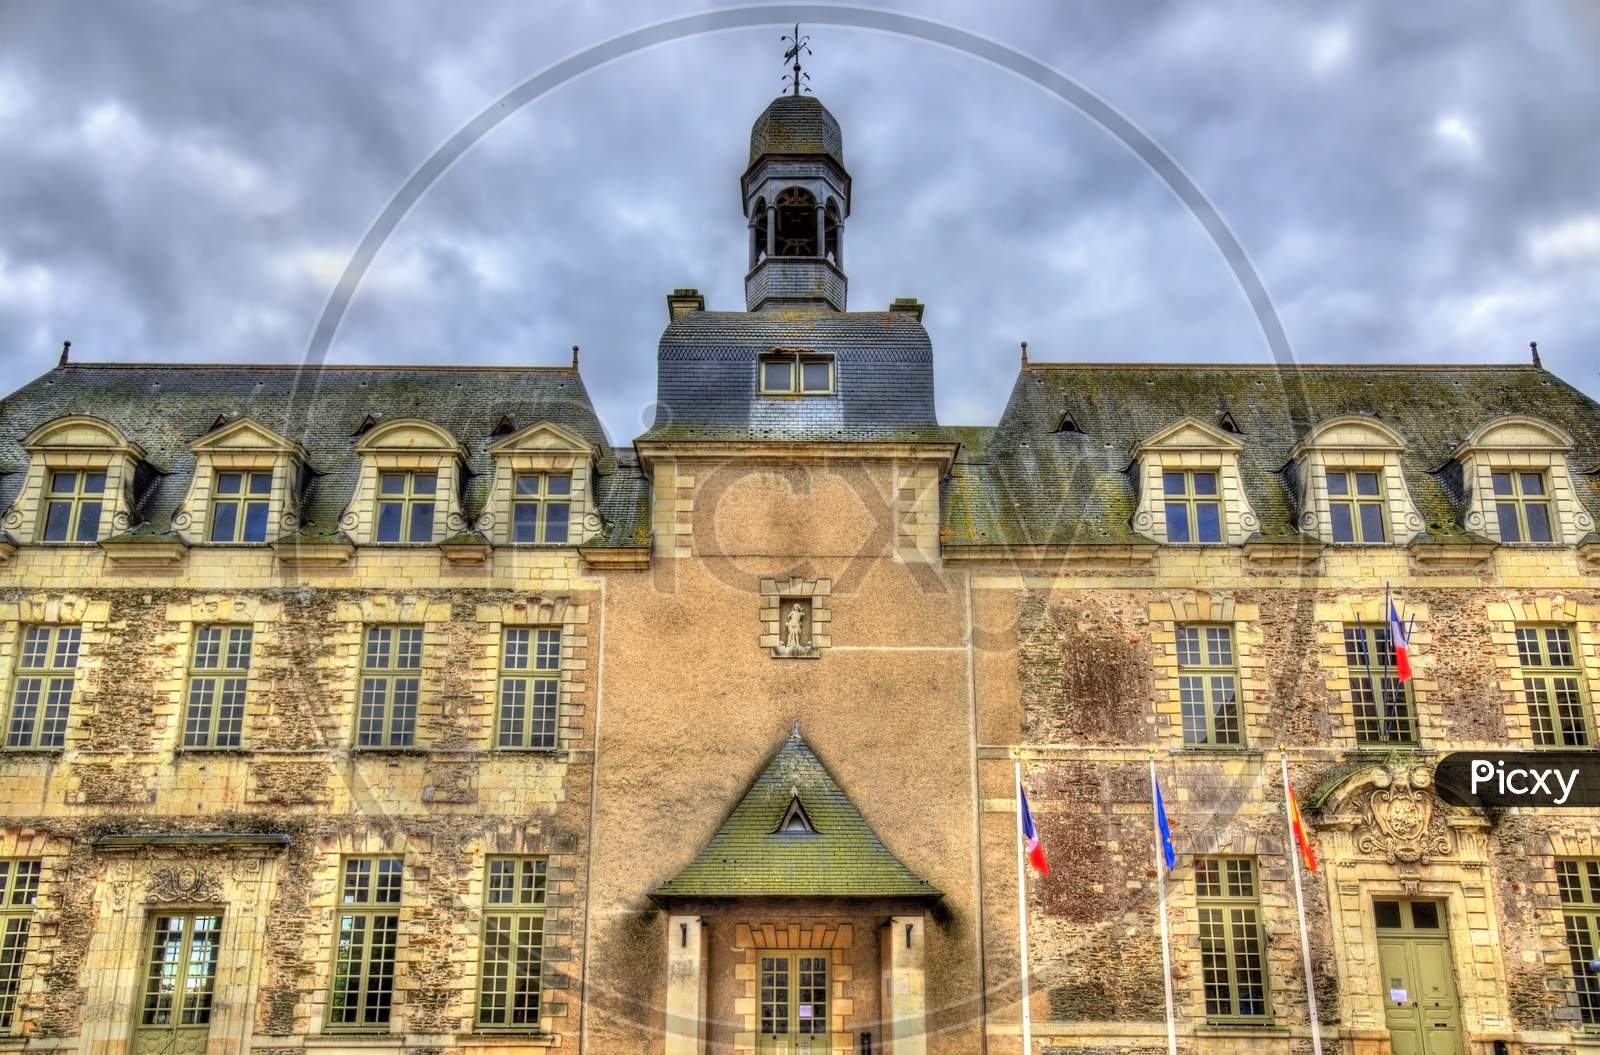 Town Hall Of Saint-Georges-Sur-Loire In France